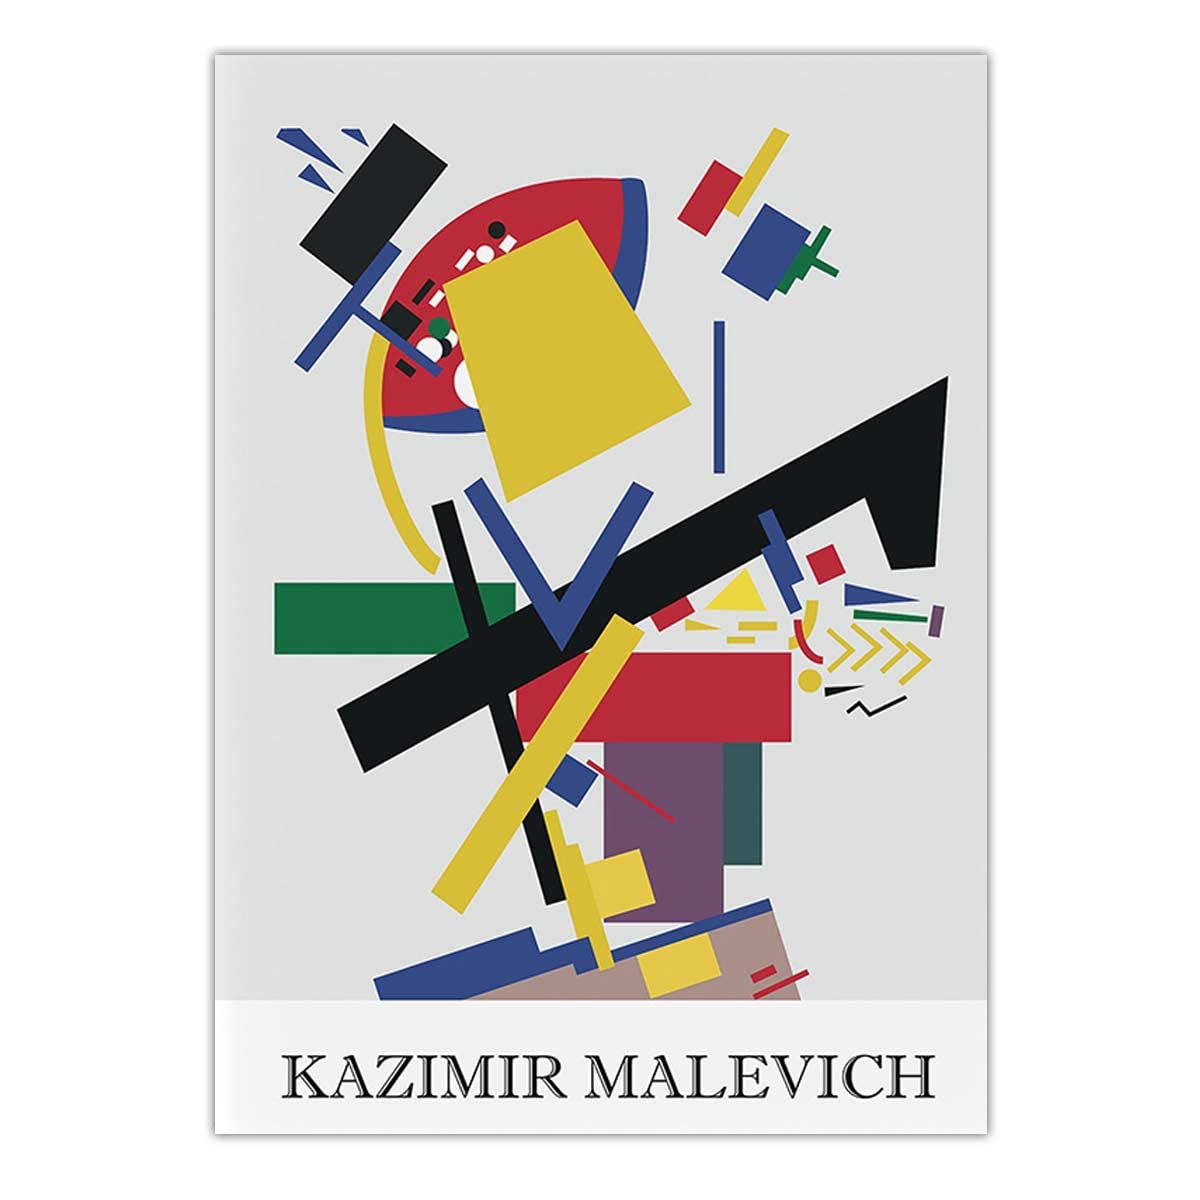 Kazimir Malevich Geometric Suprematism Wall Art Canvas Painting Nordic Posters And Prints Wall Picture For Living Room Decor《Untitled》(40x56cm-(15.7x22.1in), Unframed): Posters & Prints